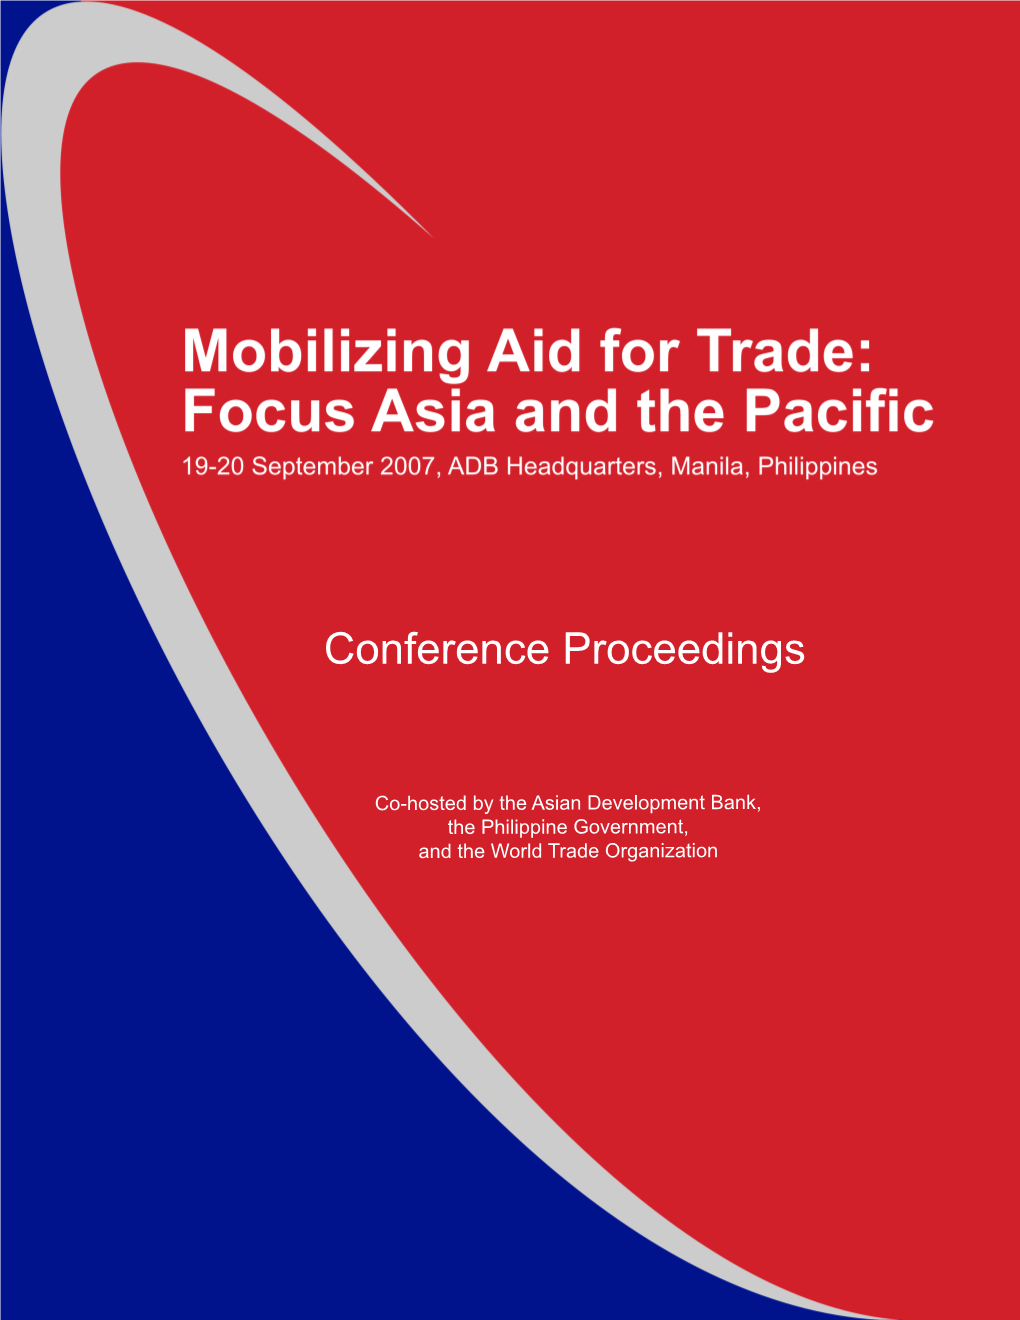 Mobilizing Aid-For-Trade Focus Asia and the Pacific Conference